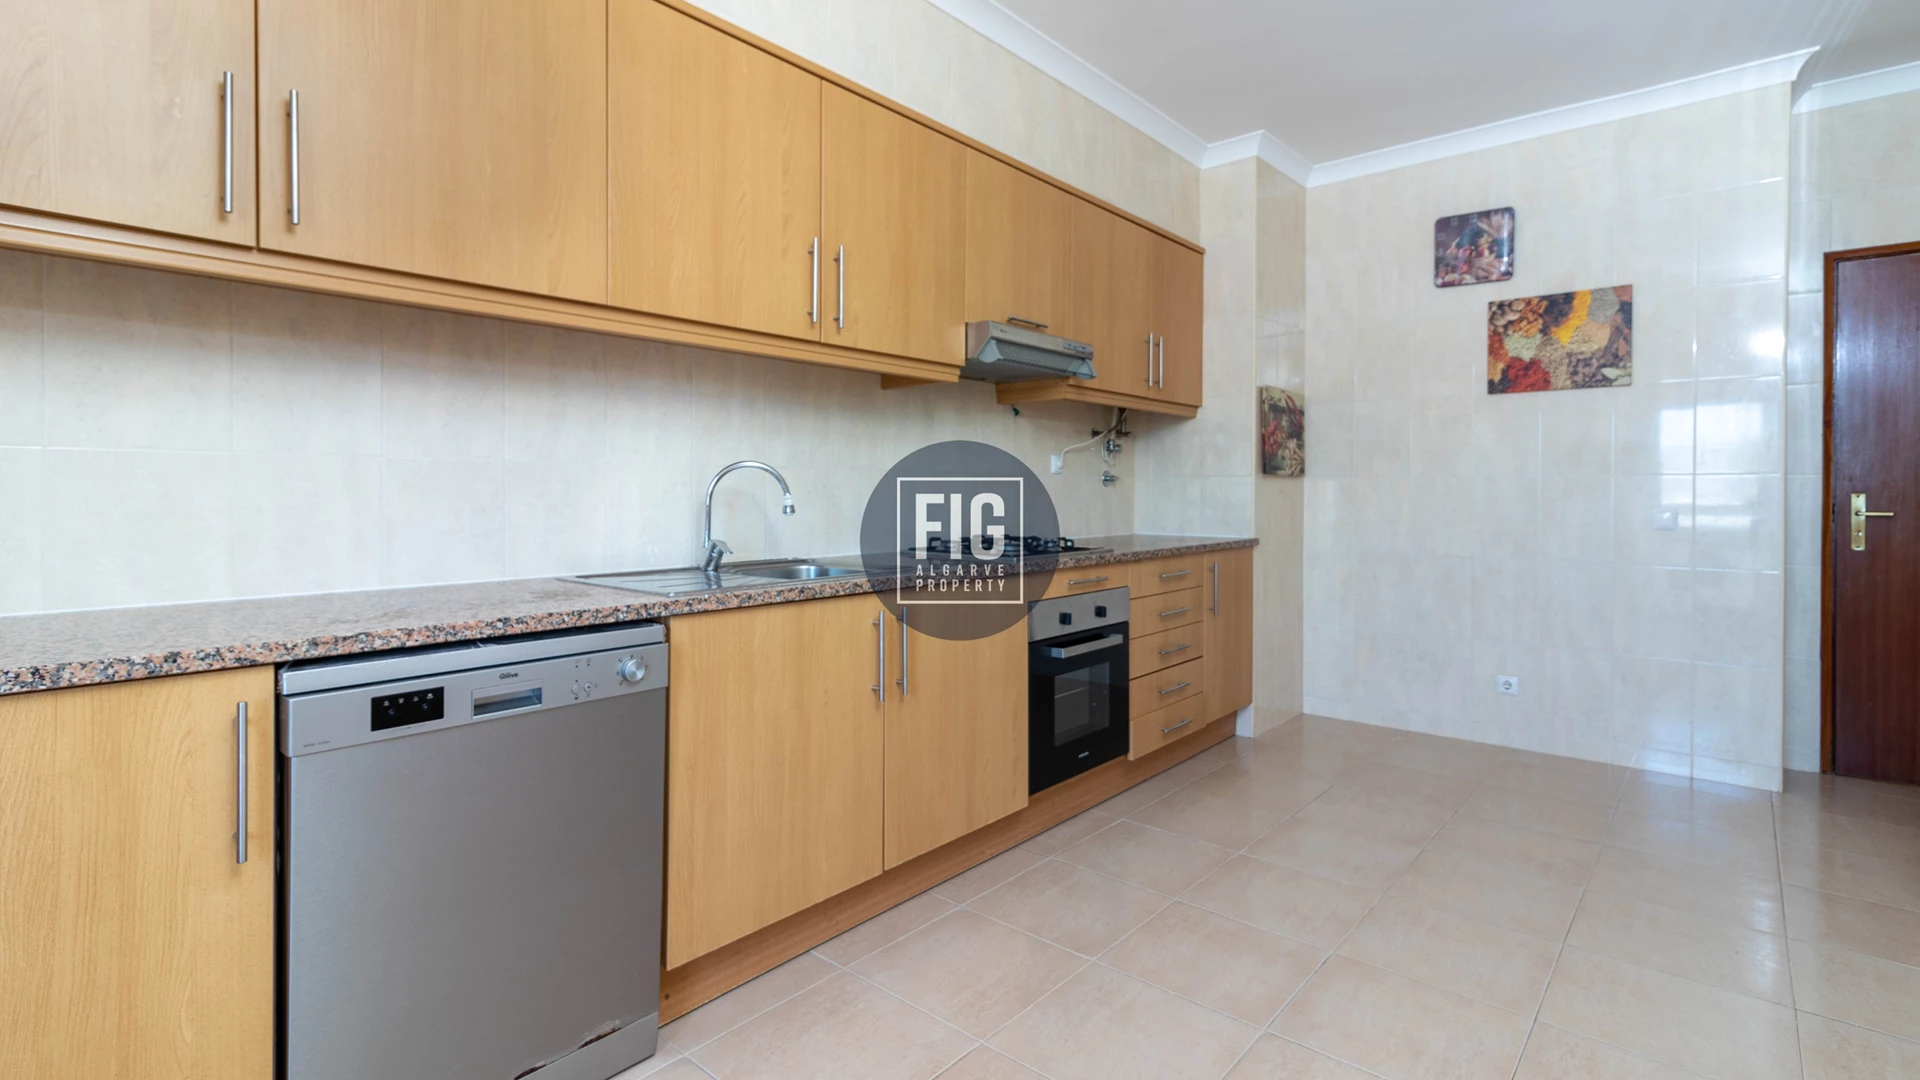 2 Bedroom apartment located in the center of the city of Portimão.  - For sale - FIG1853 - Centro